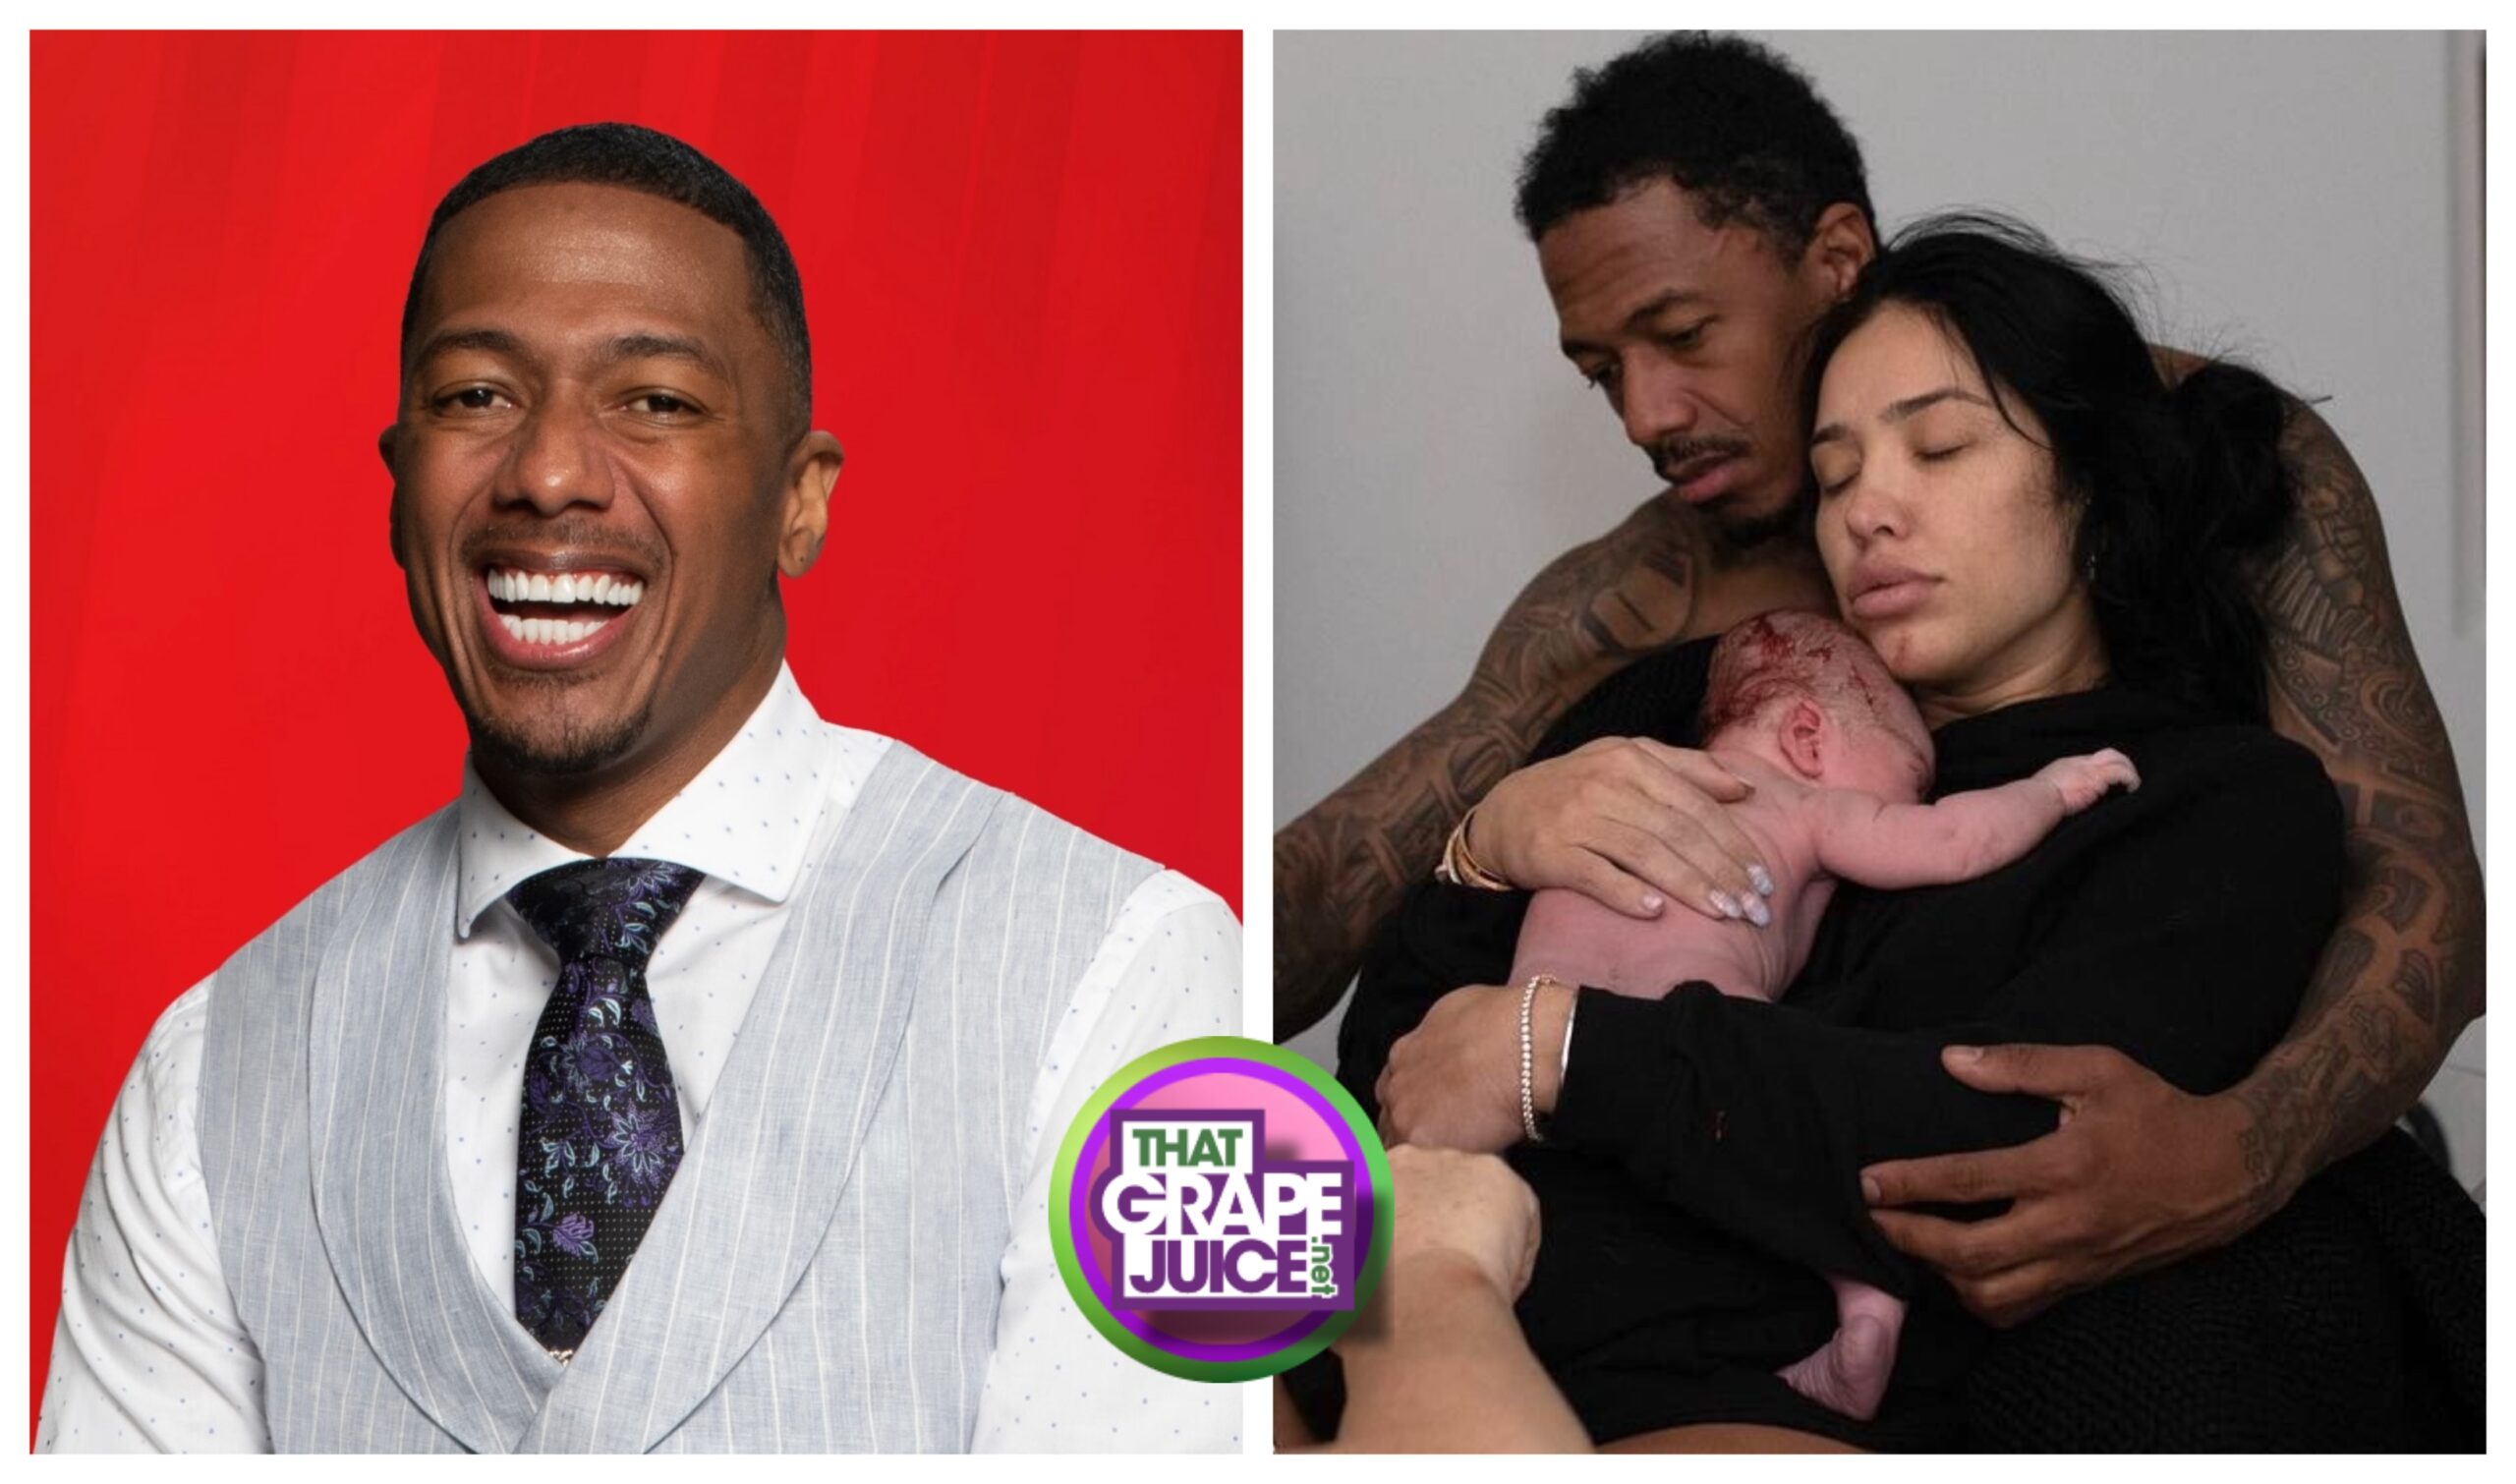 Nick Cannon EIGHTH Child, with NINTH on the Way That Grape Juice